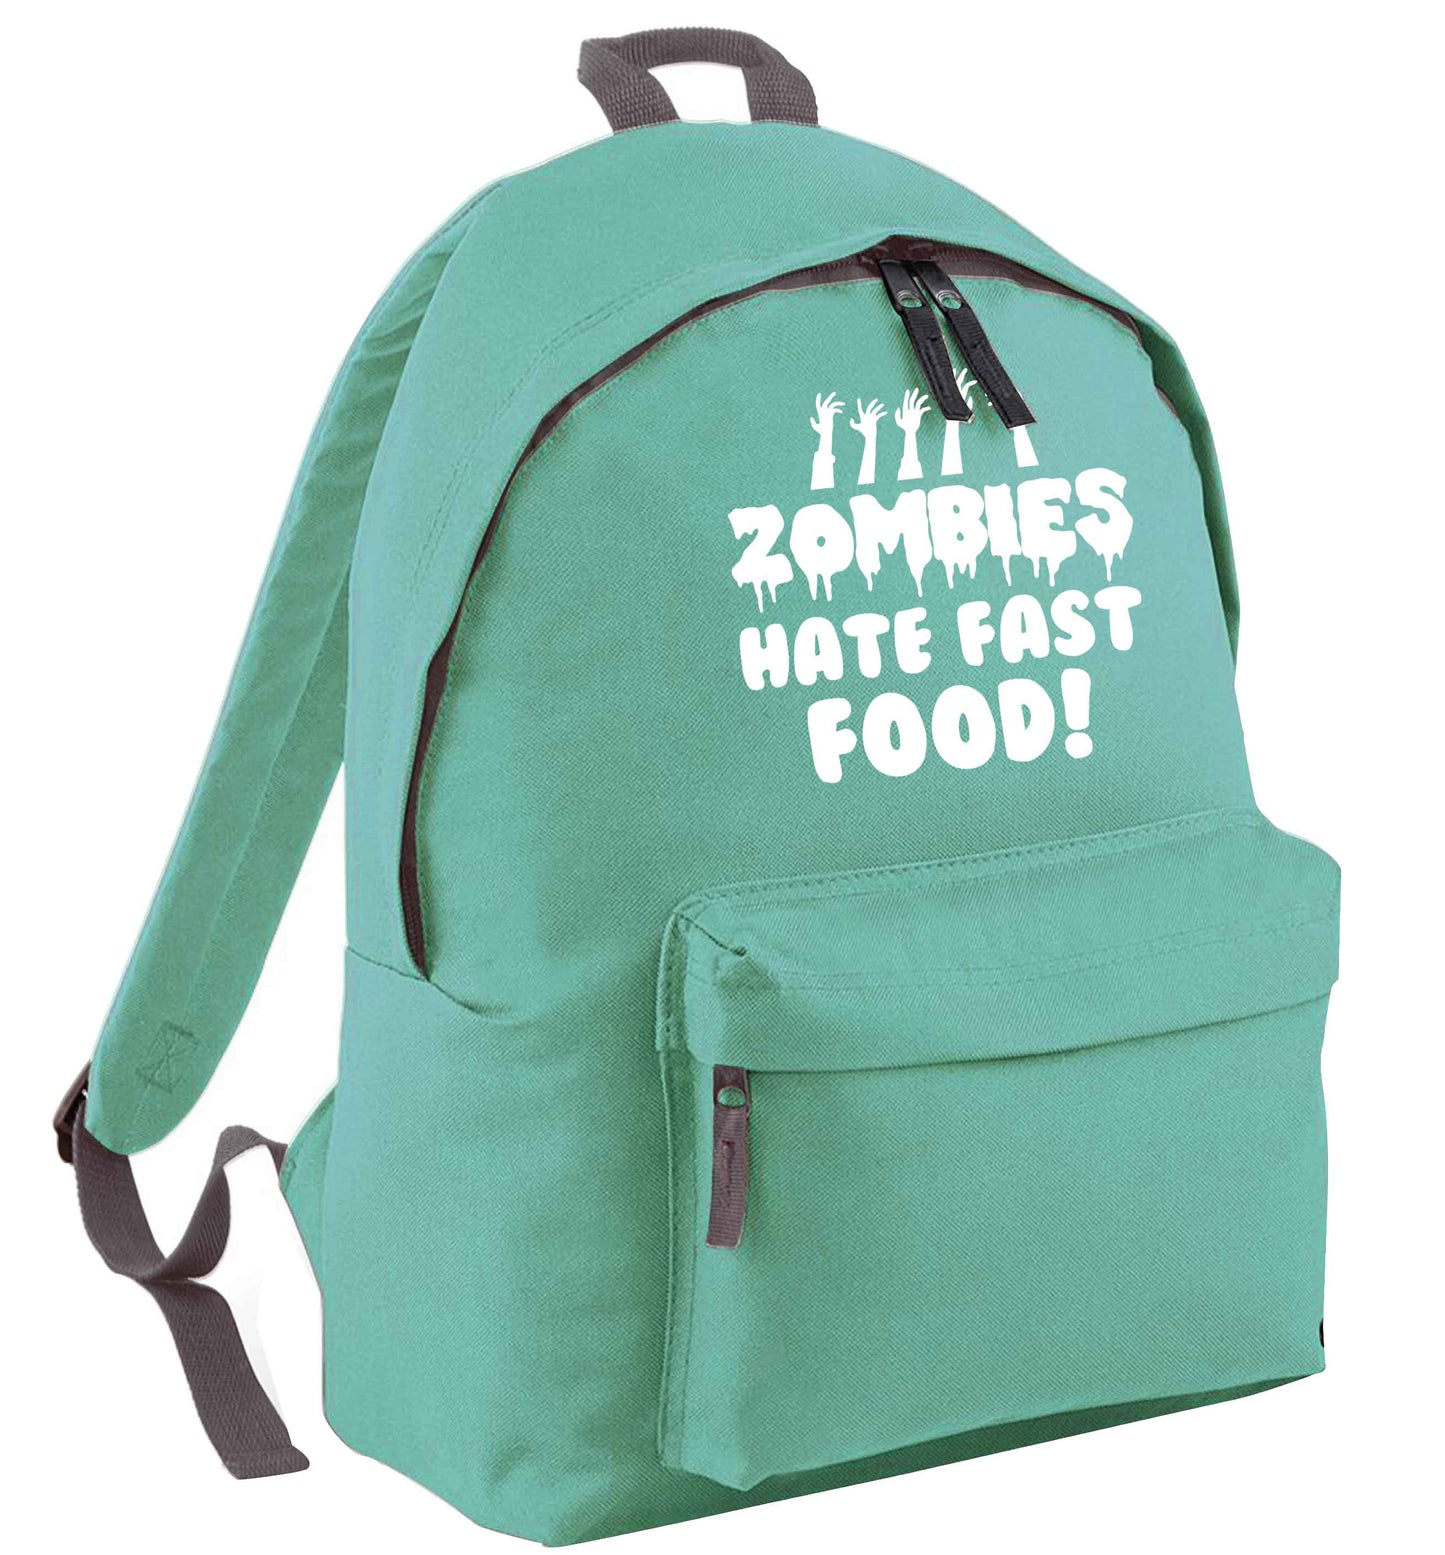 Zombies hate fast food mint adults backpack